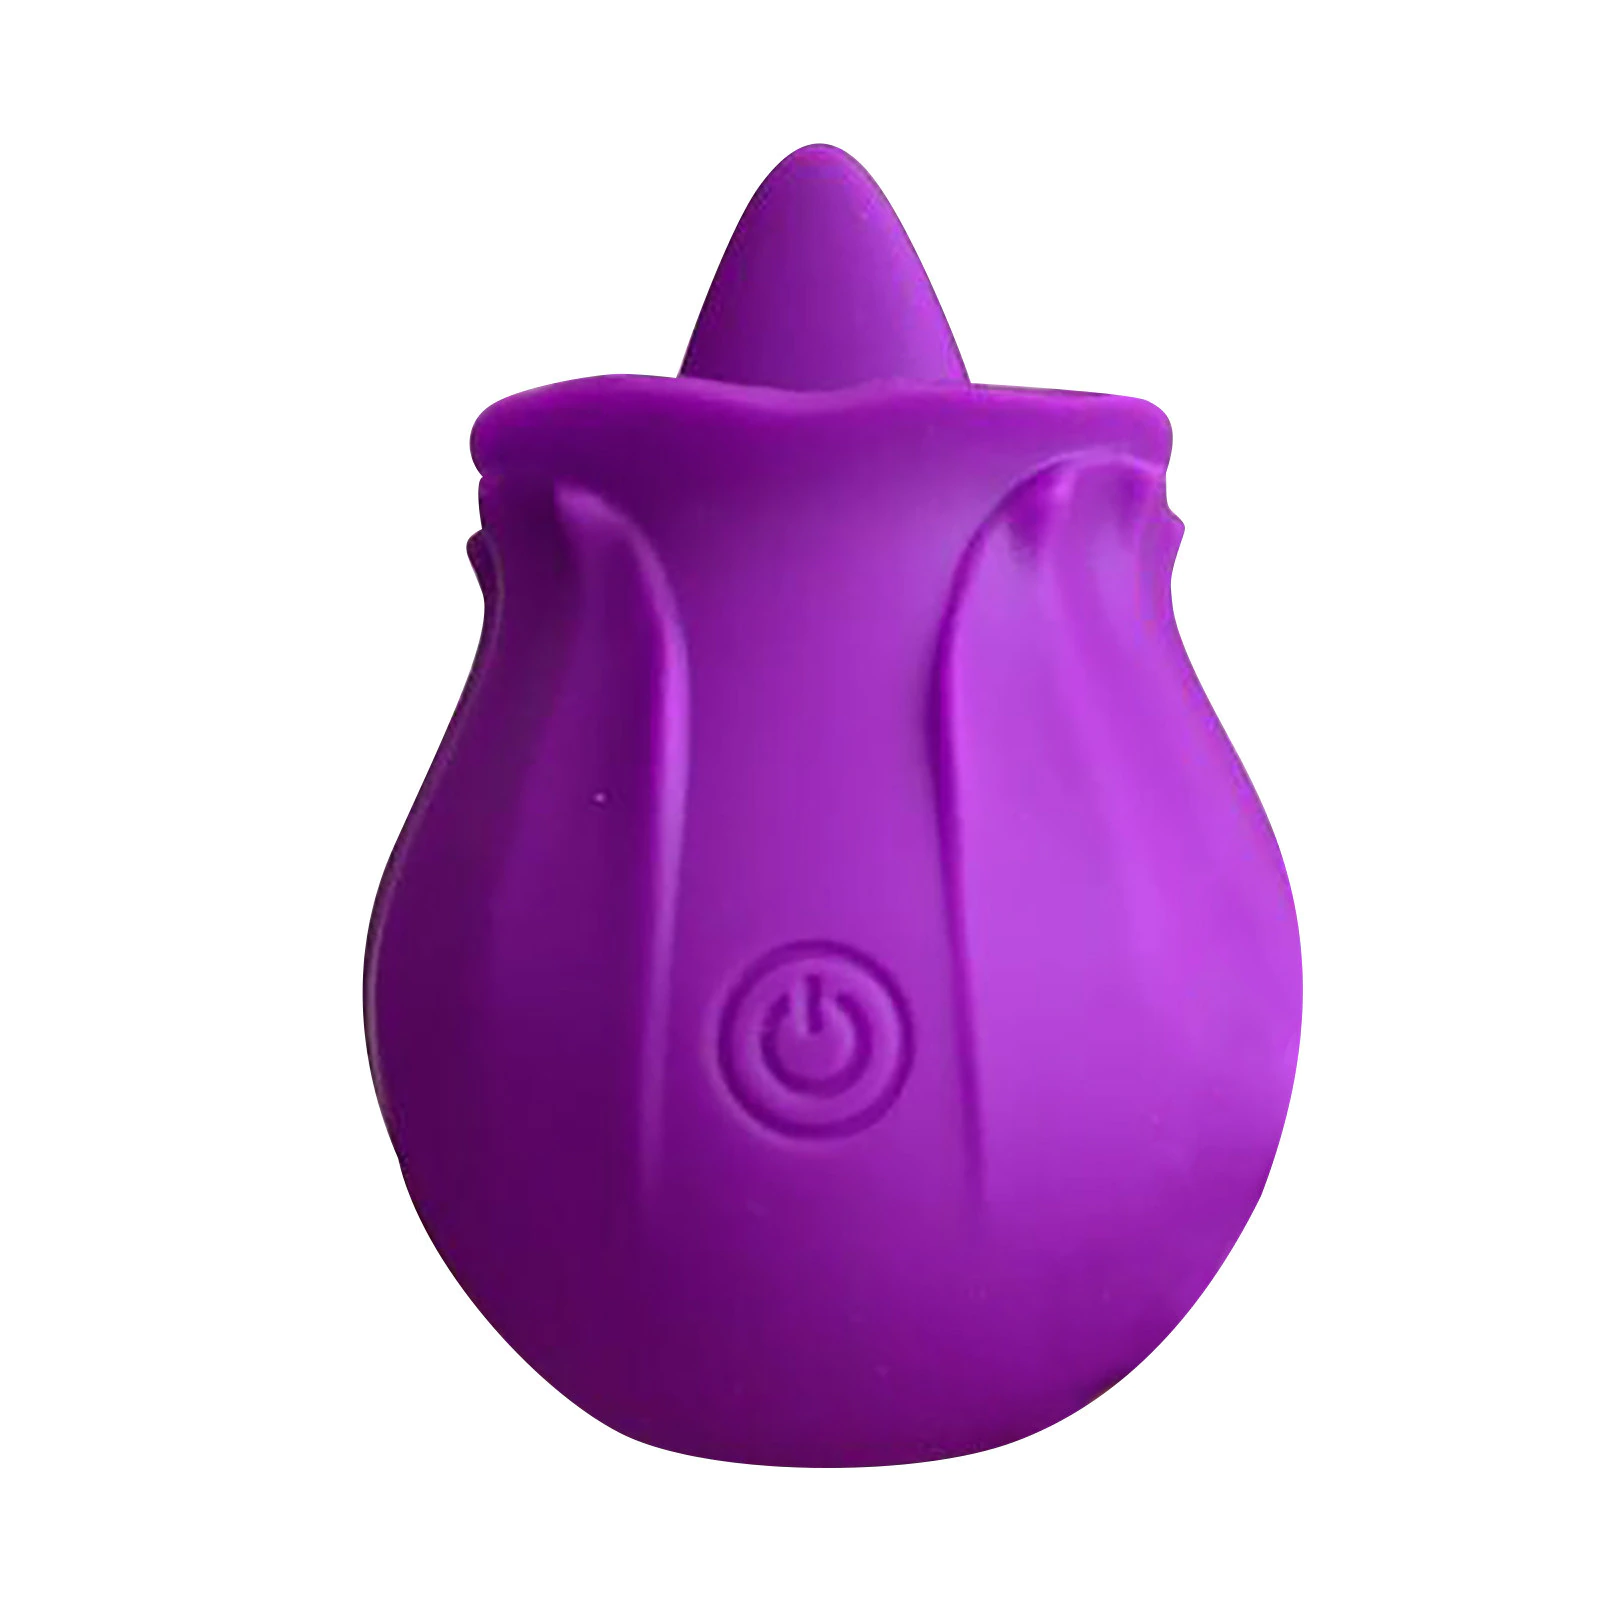 Tongue Tease Rose Toy for Women Purple Color